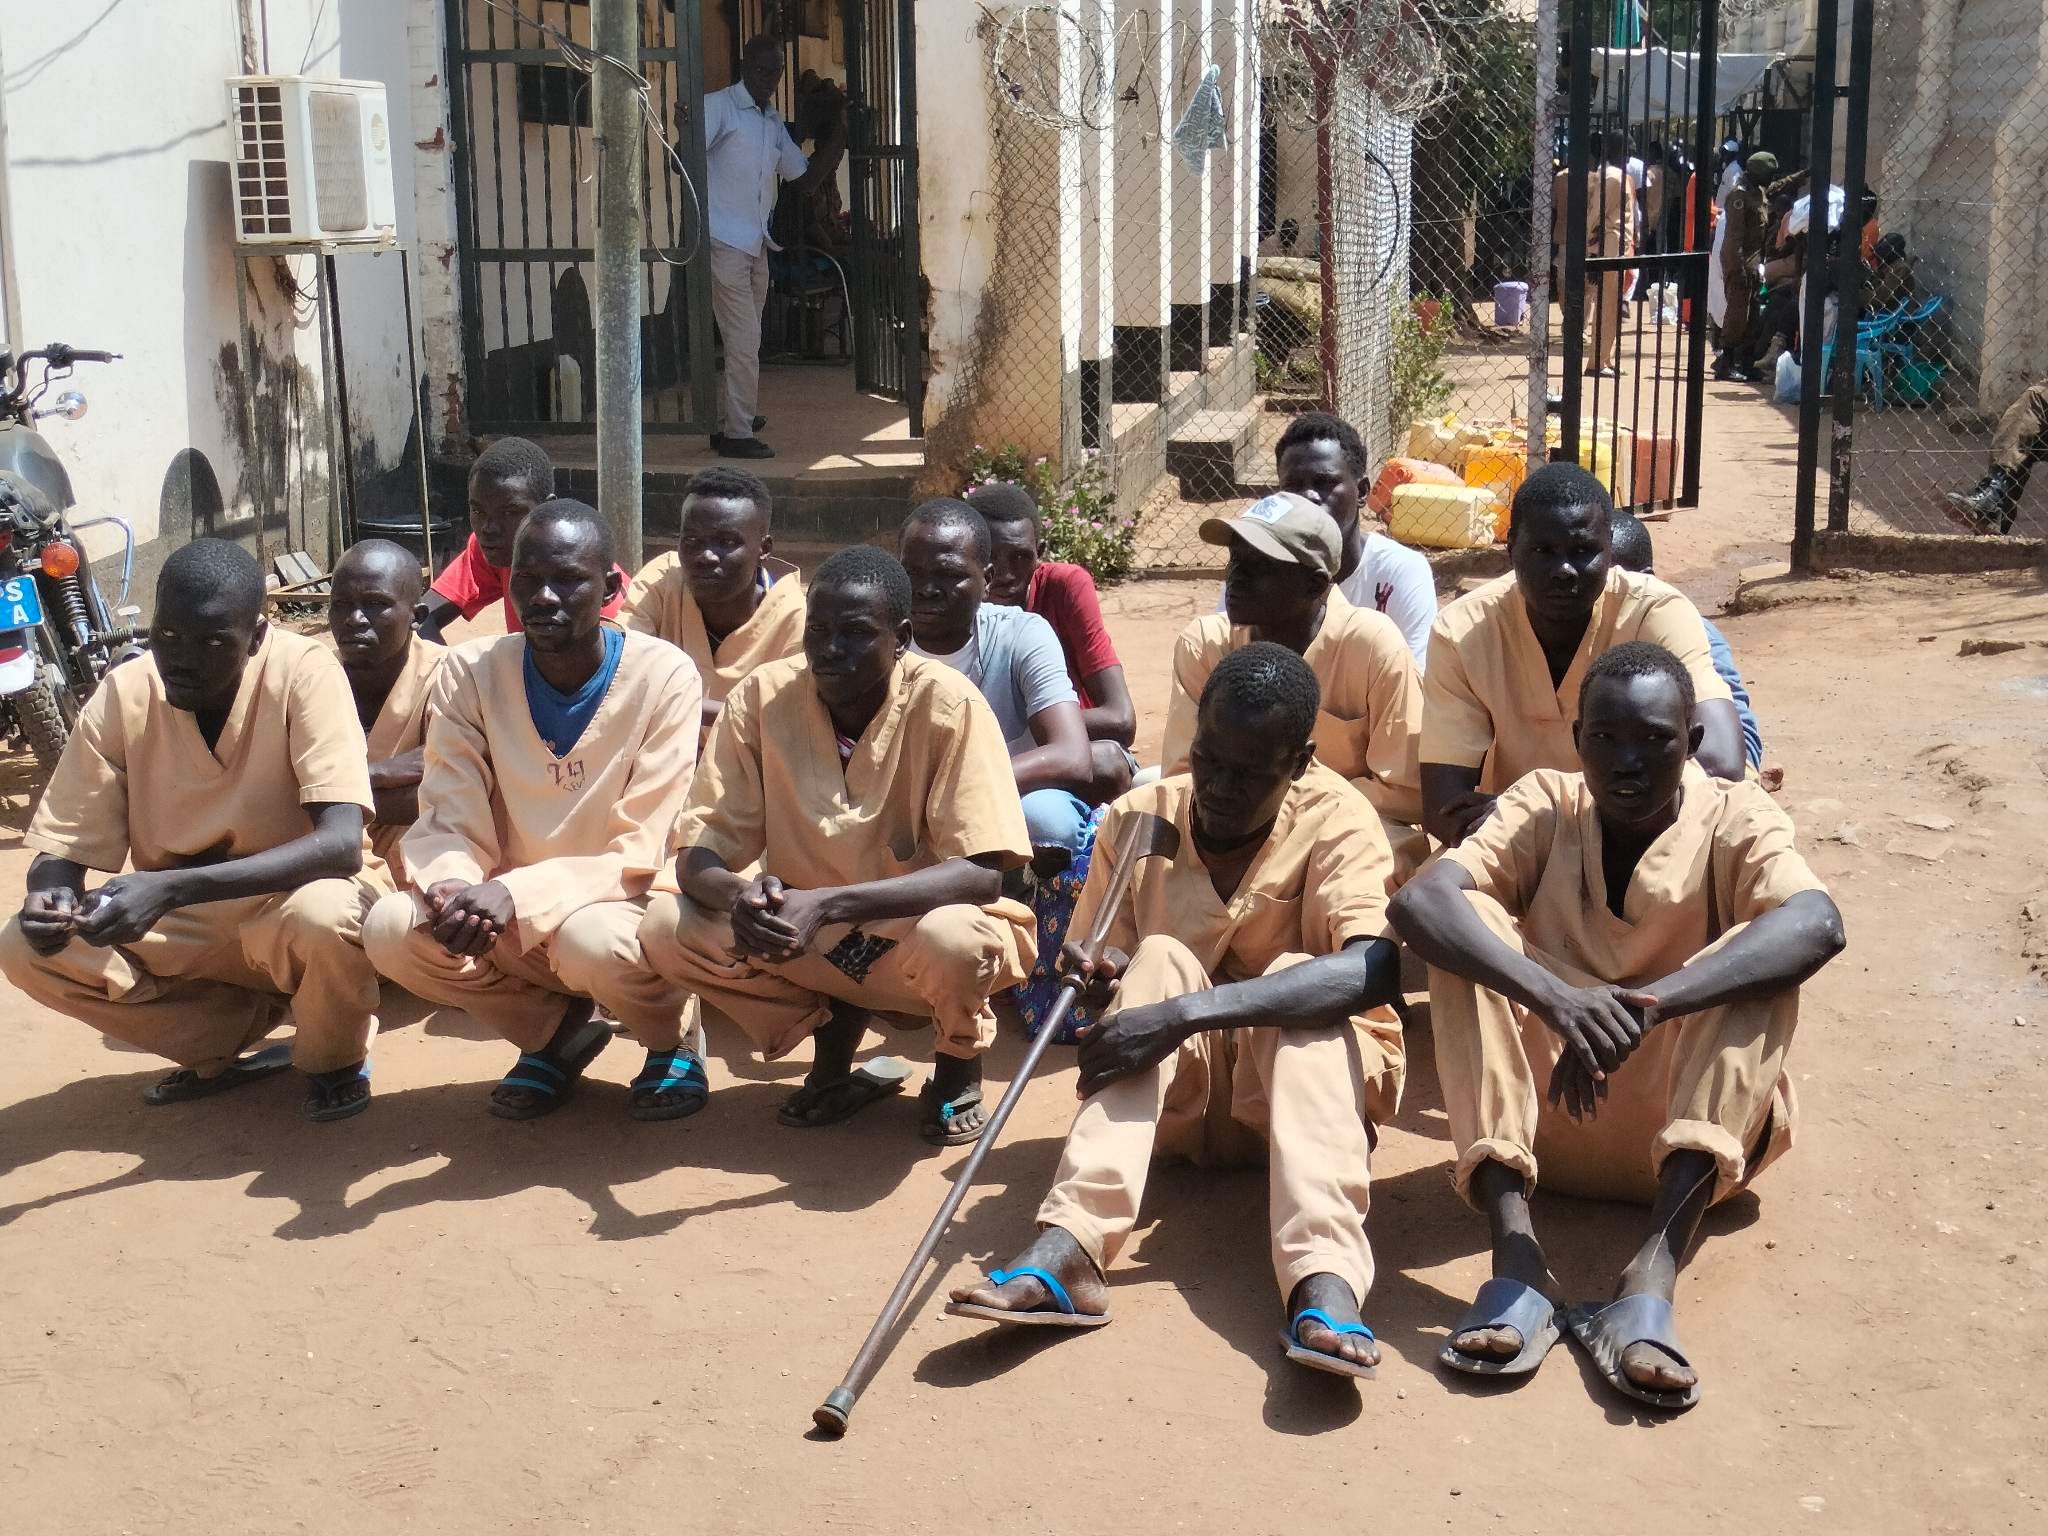 Juba Prison receives 40 suspected criminals daily – Official